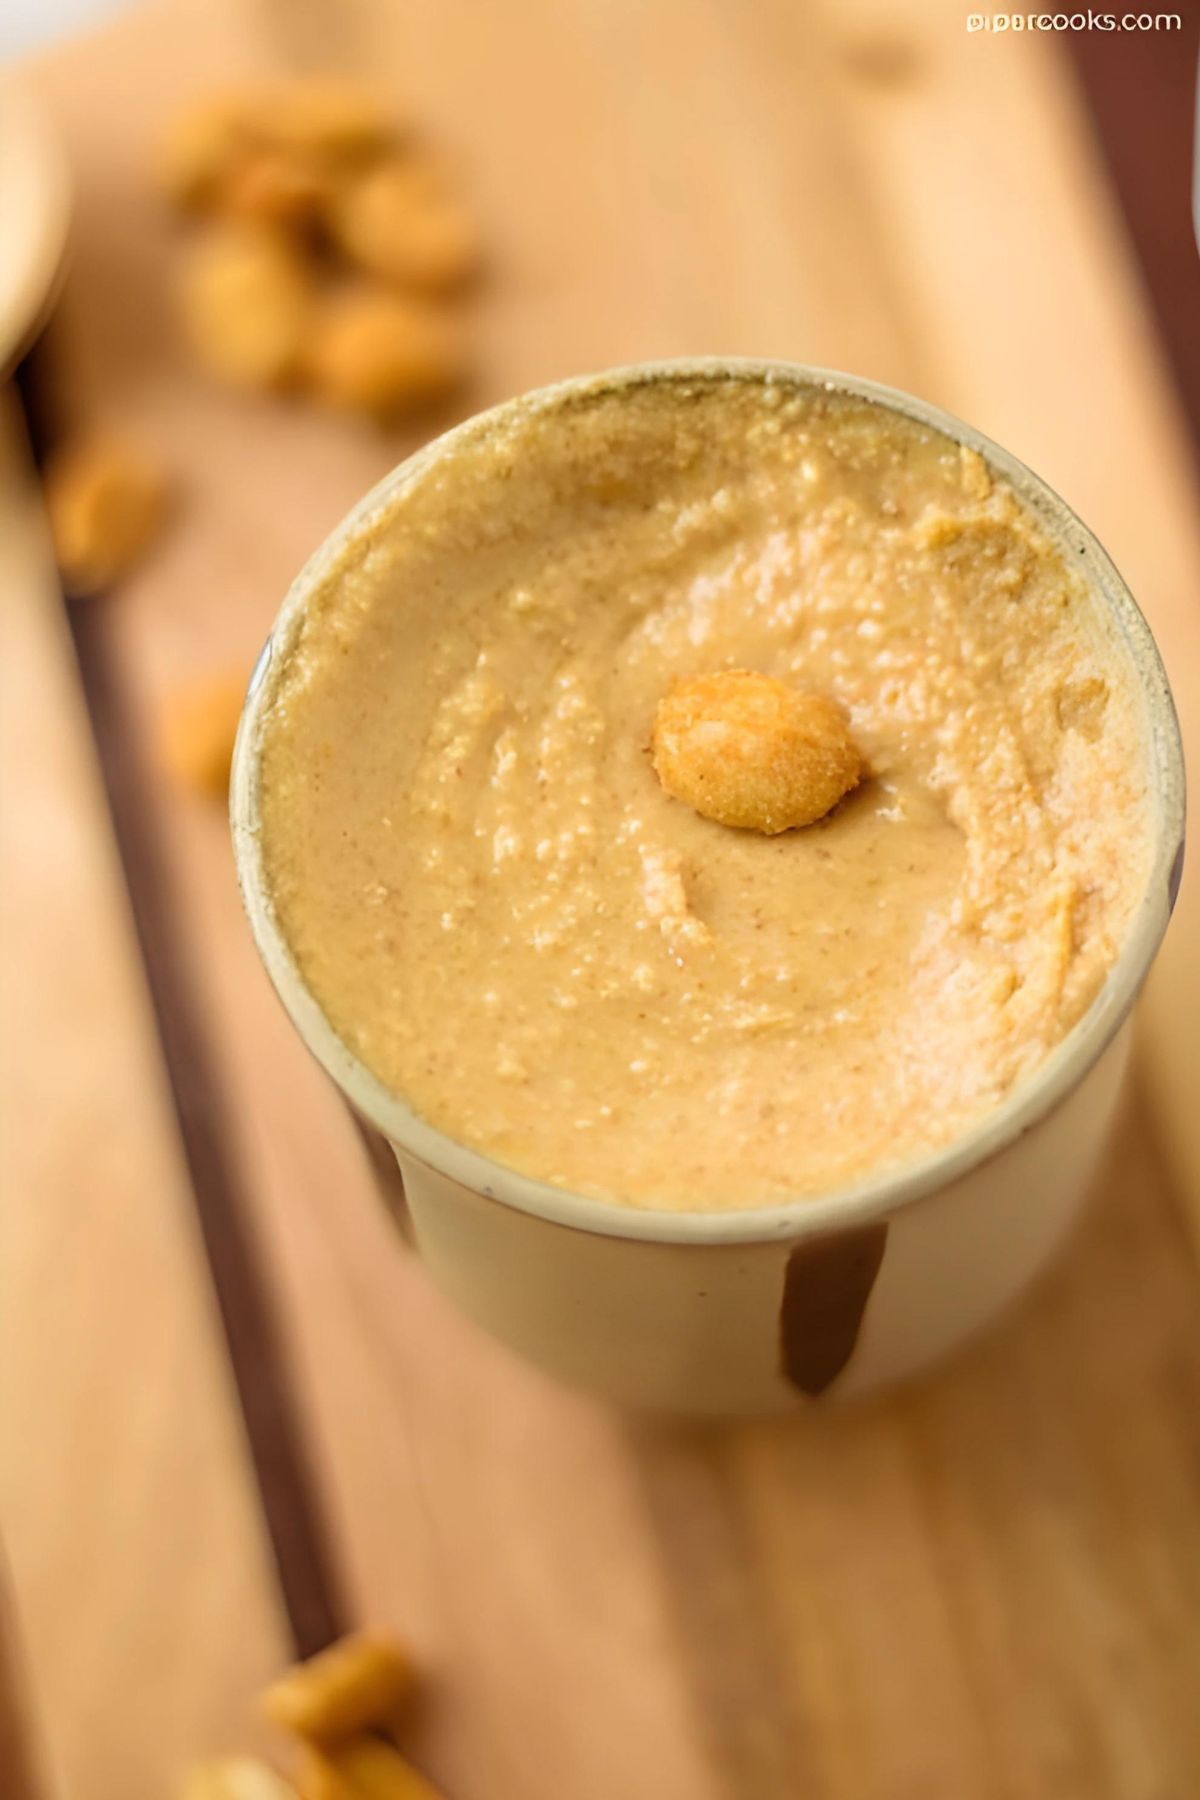 Honey Roasted Peanut Butter in a cup.